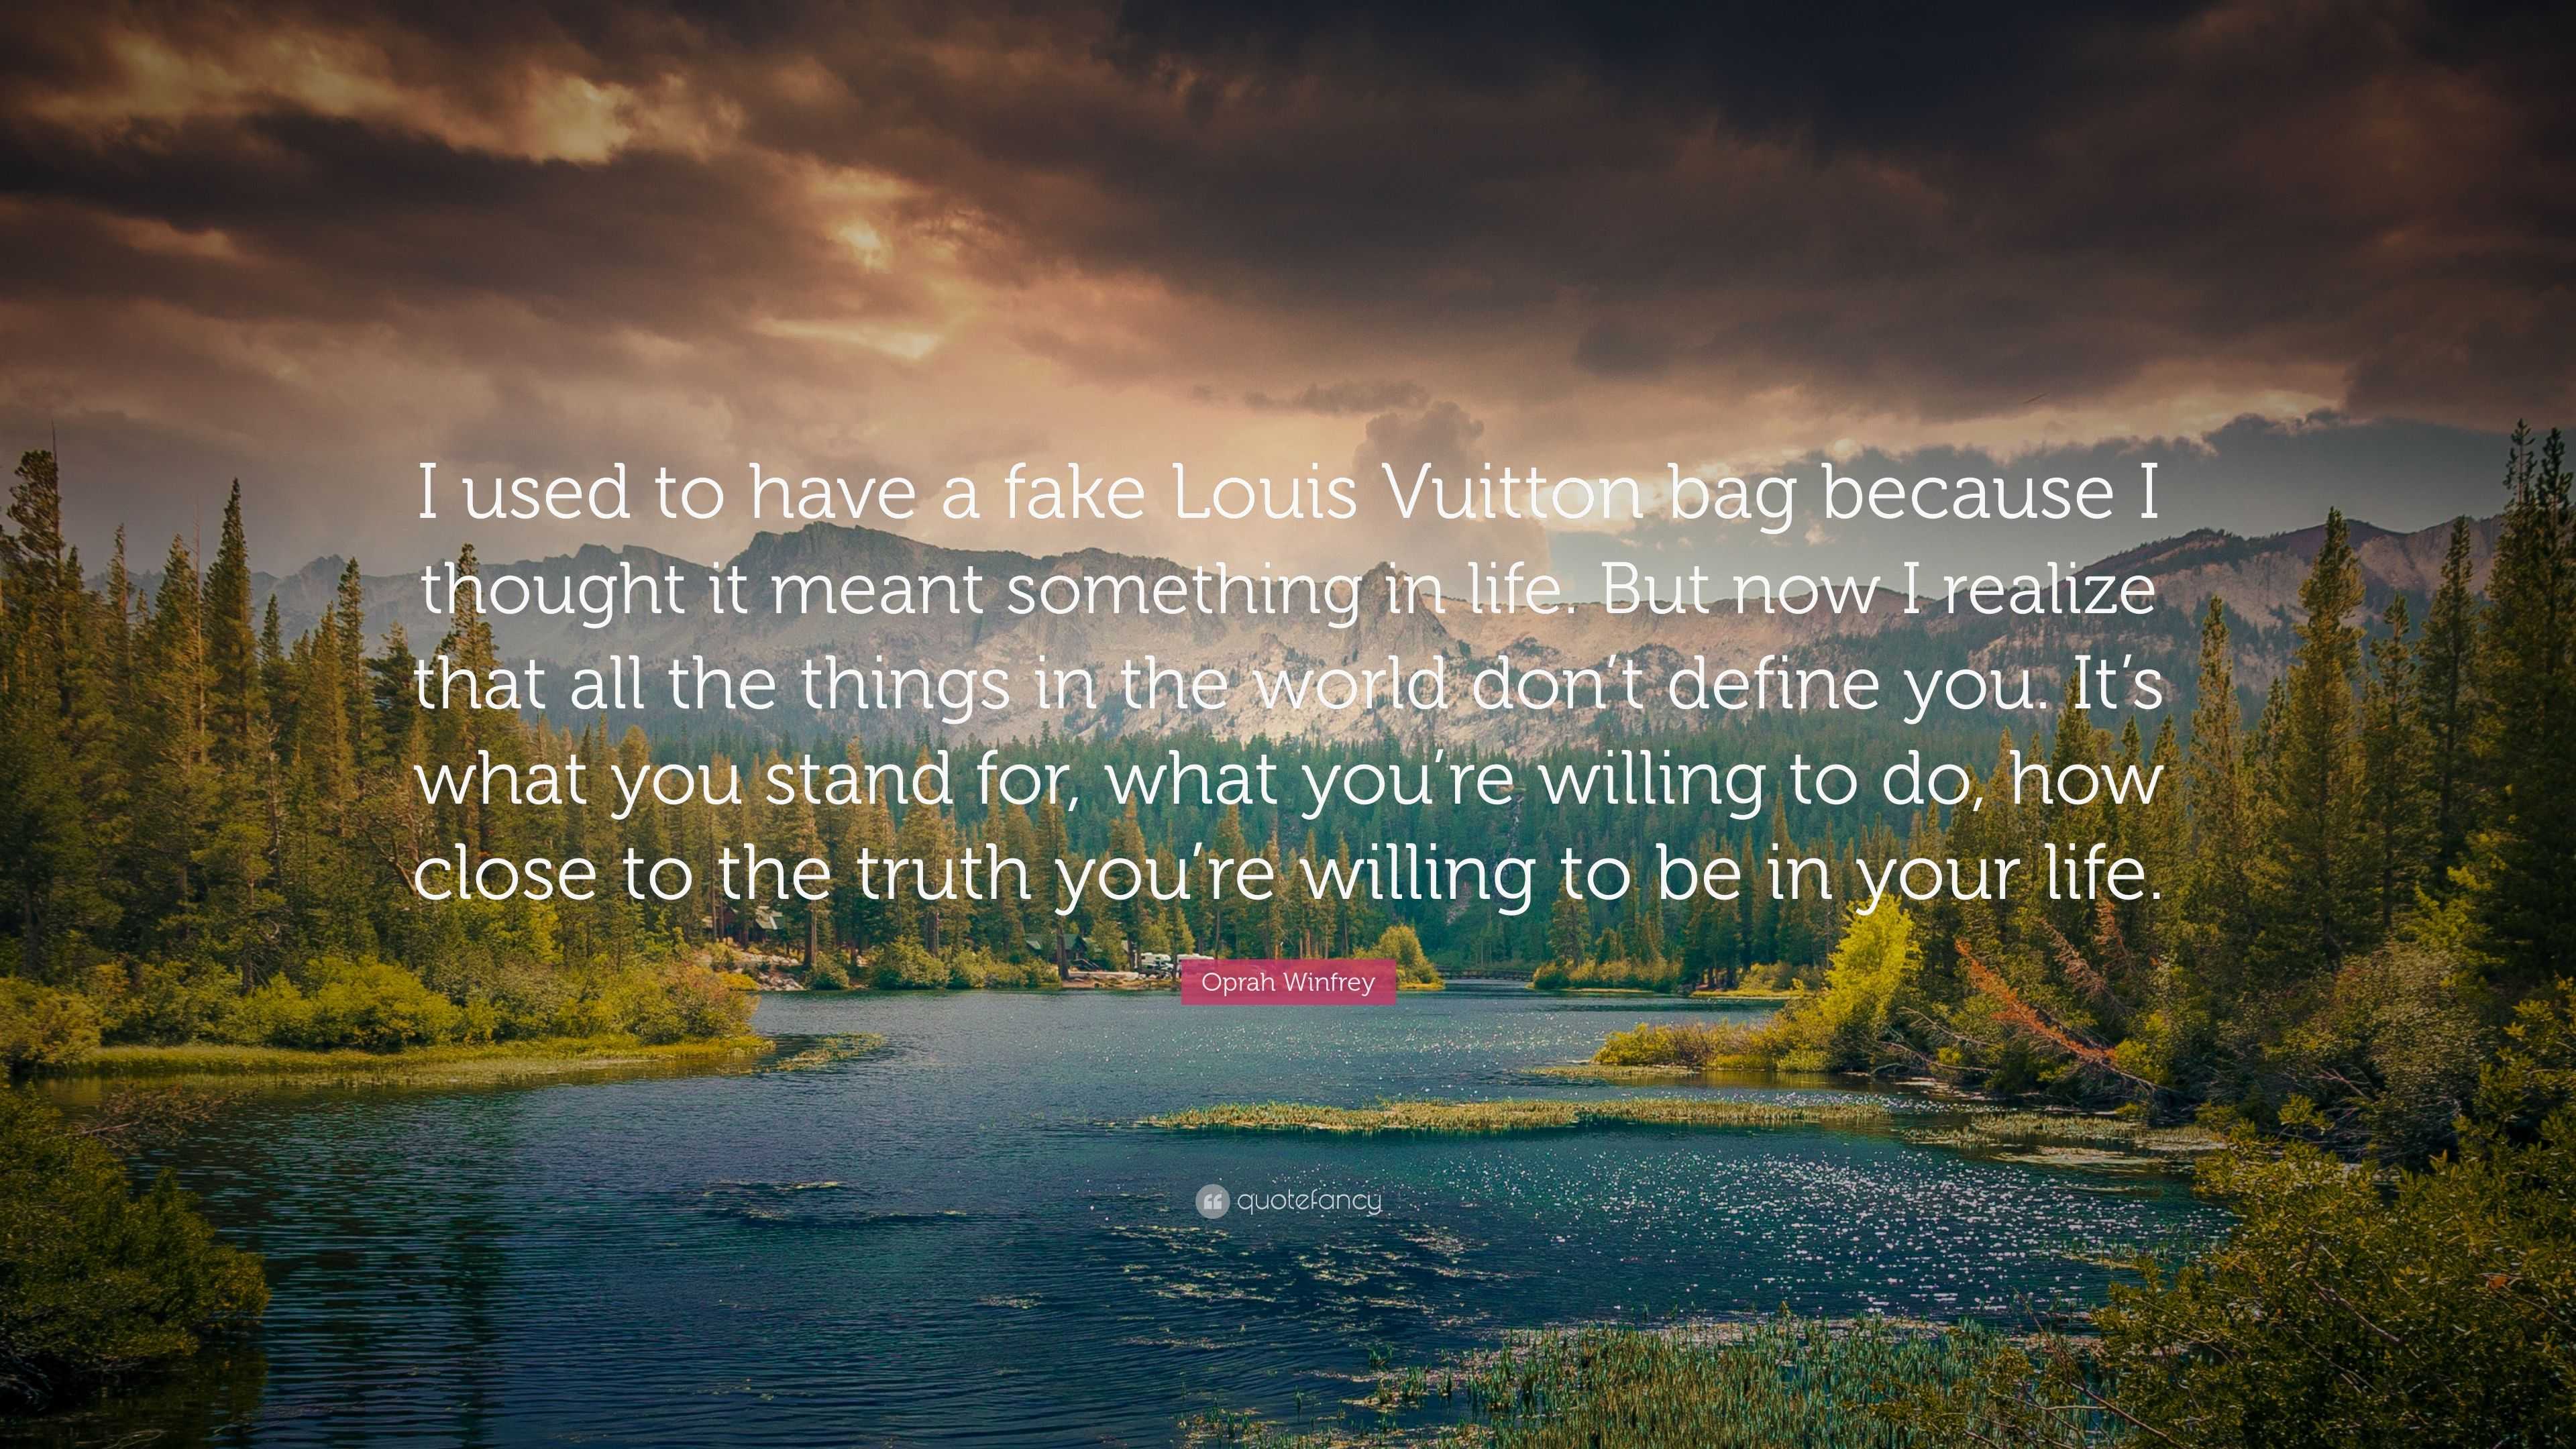 Oprah Winfrey Quote: “I used to have a fake Louis Vuitton bag